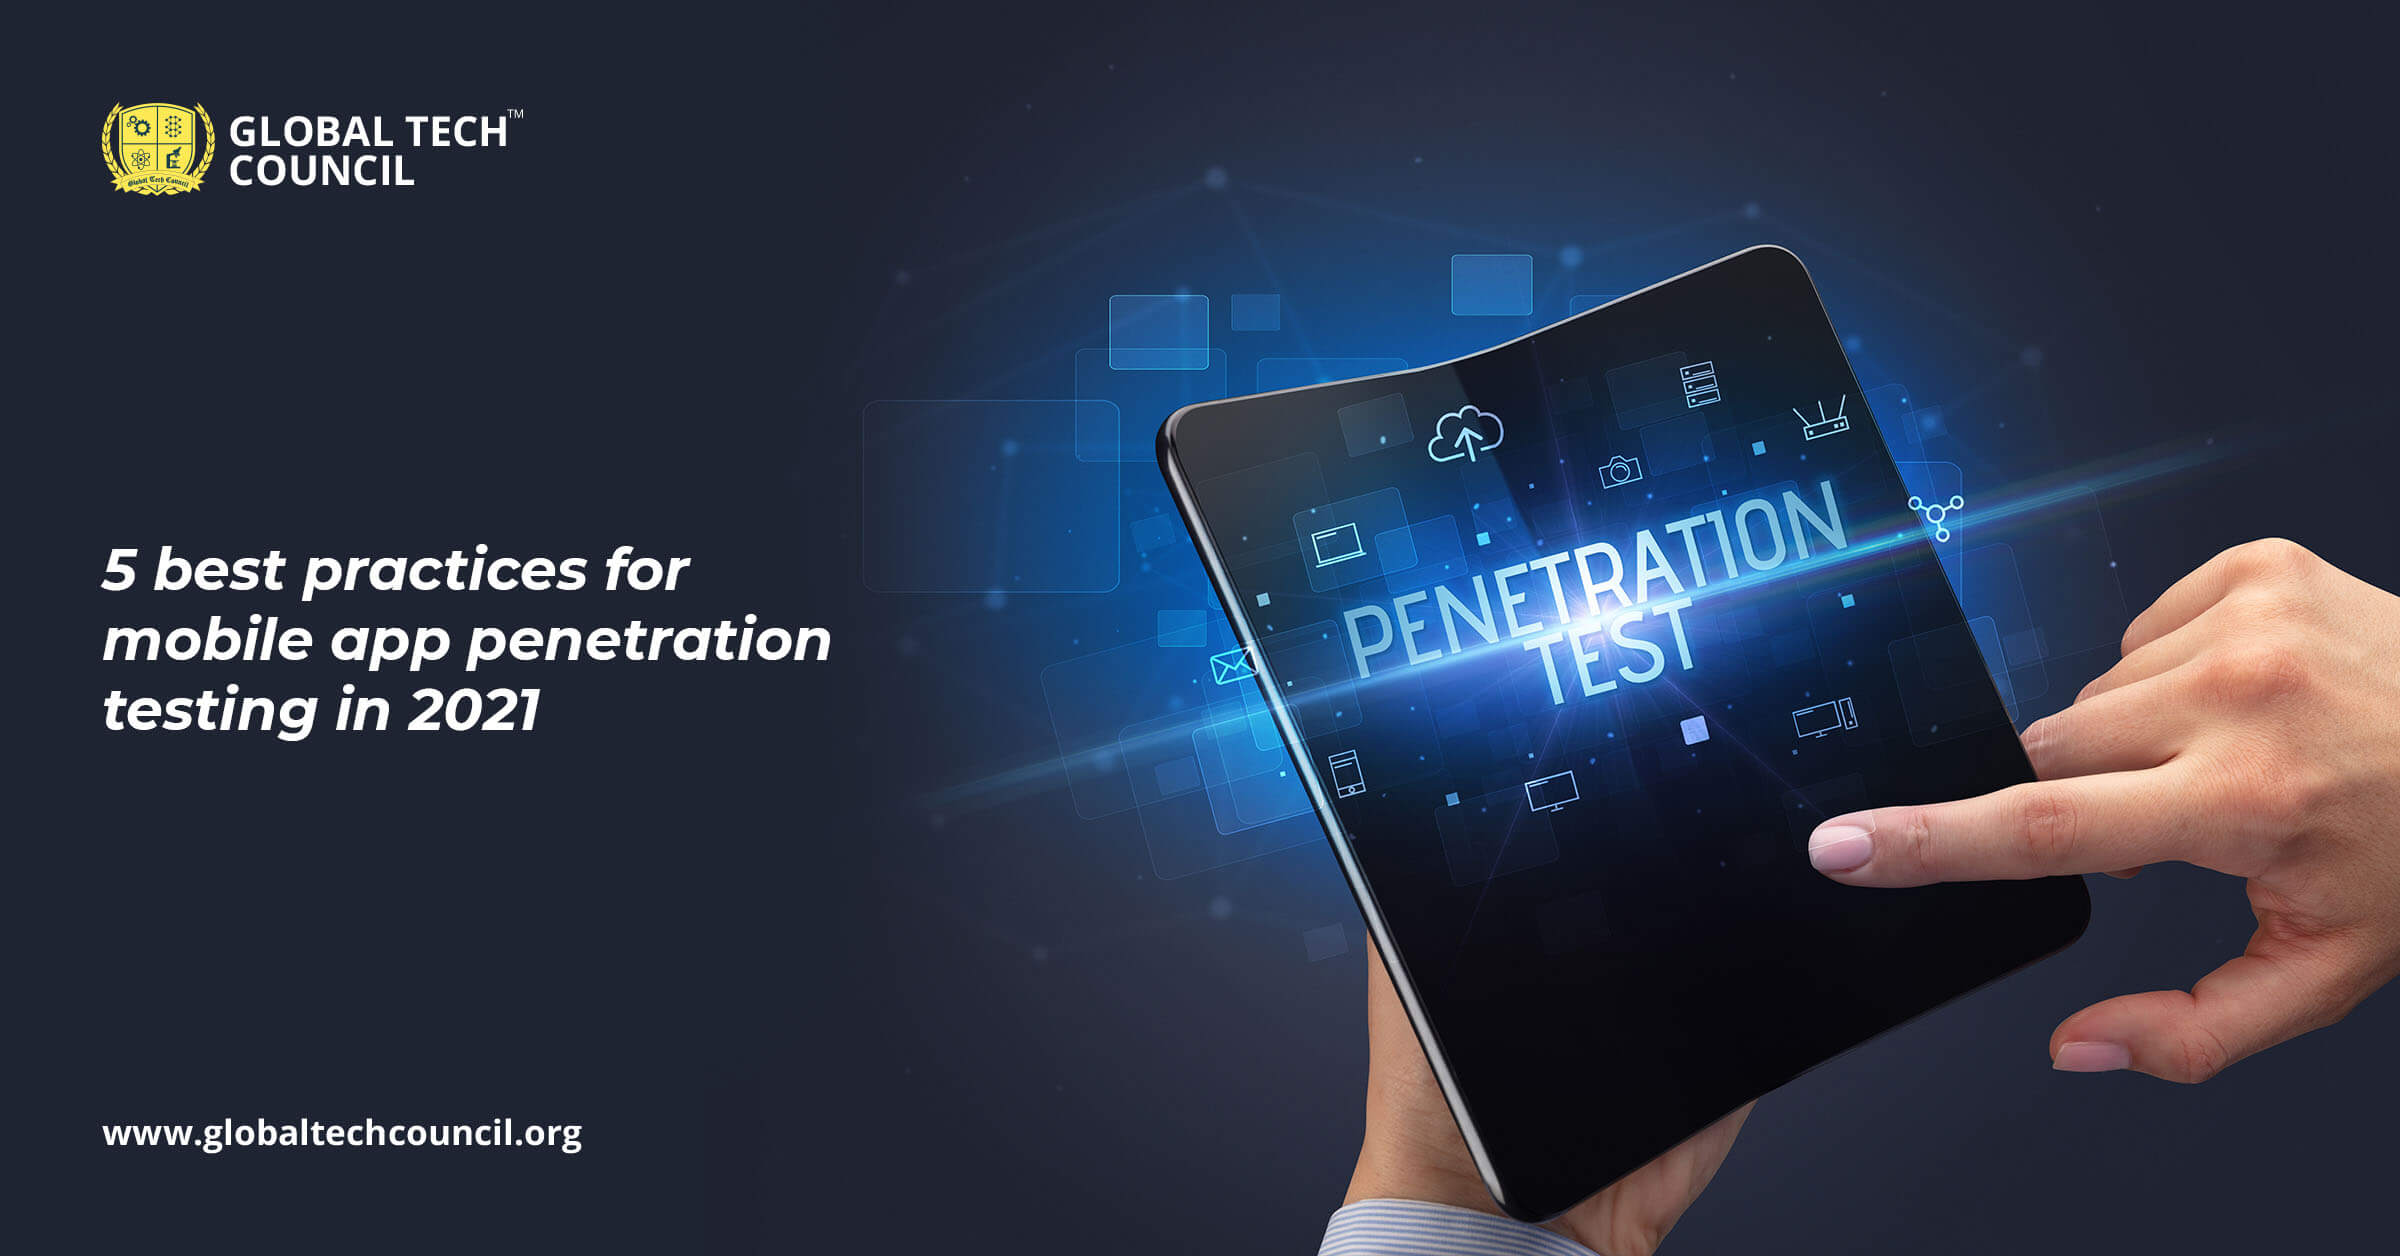 5 best practices for mobile app penetration testing in 2021